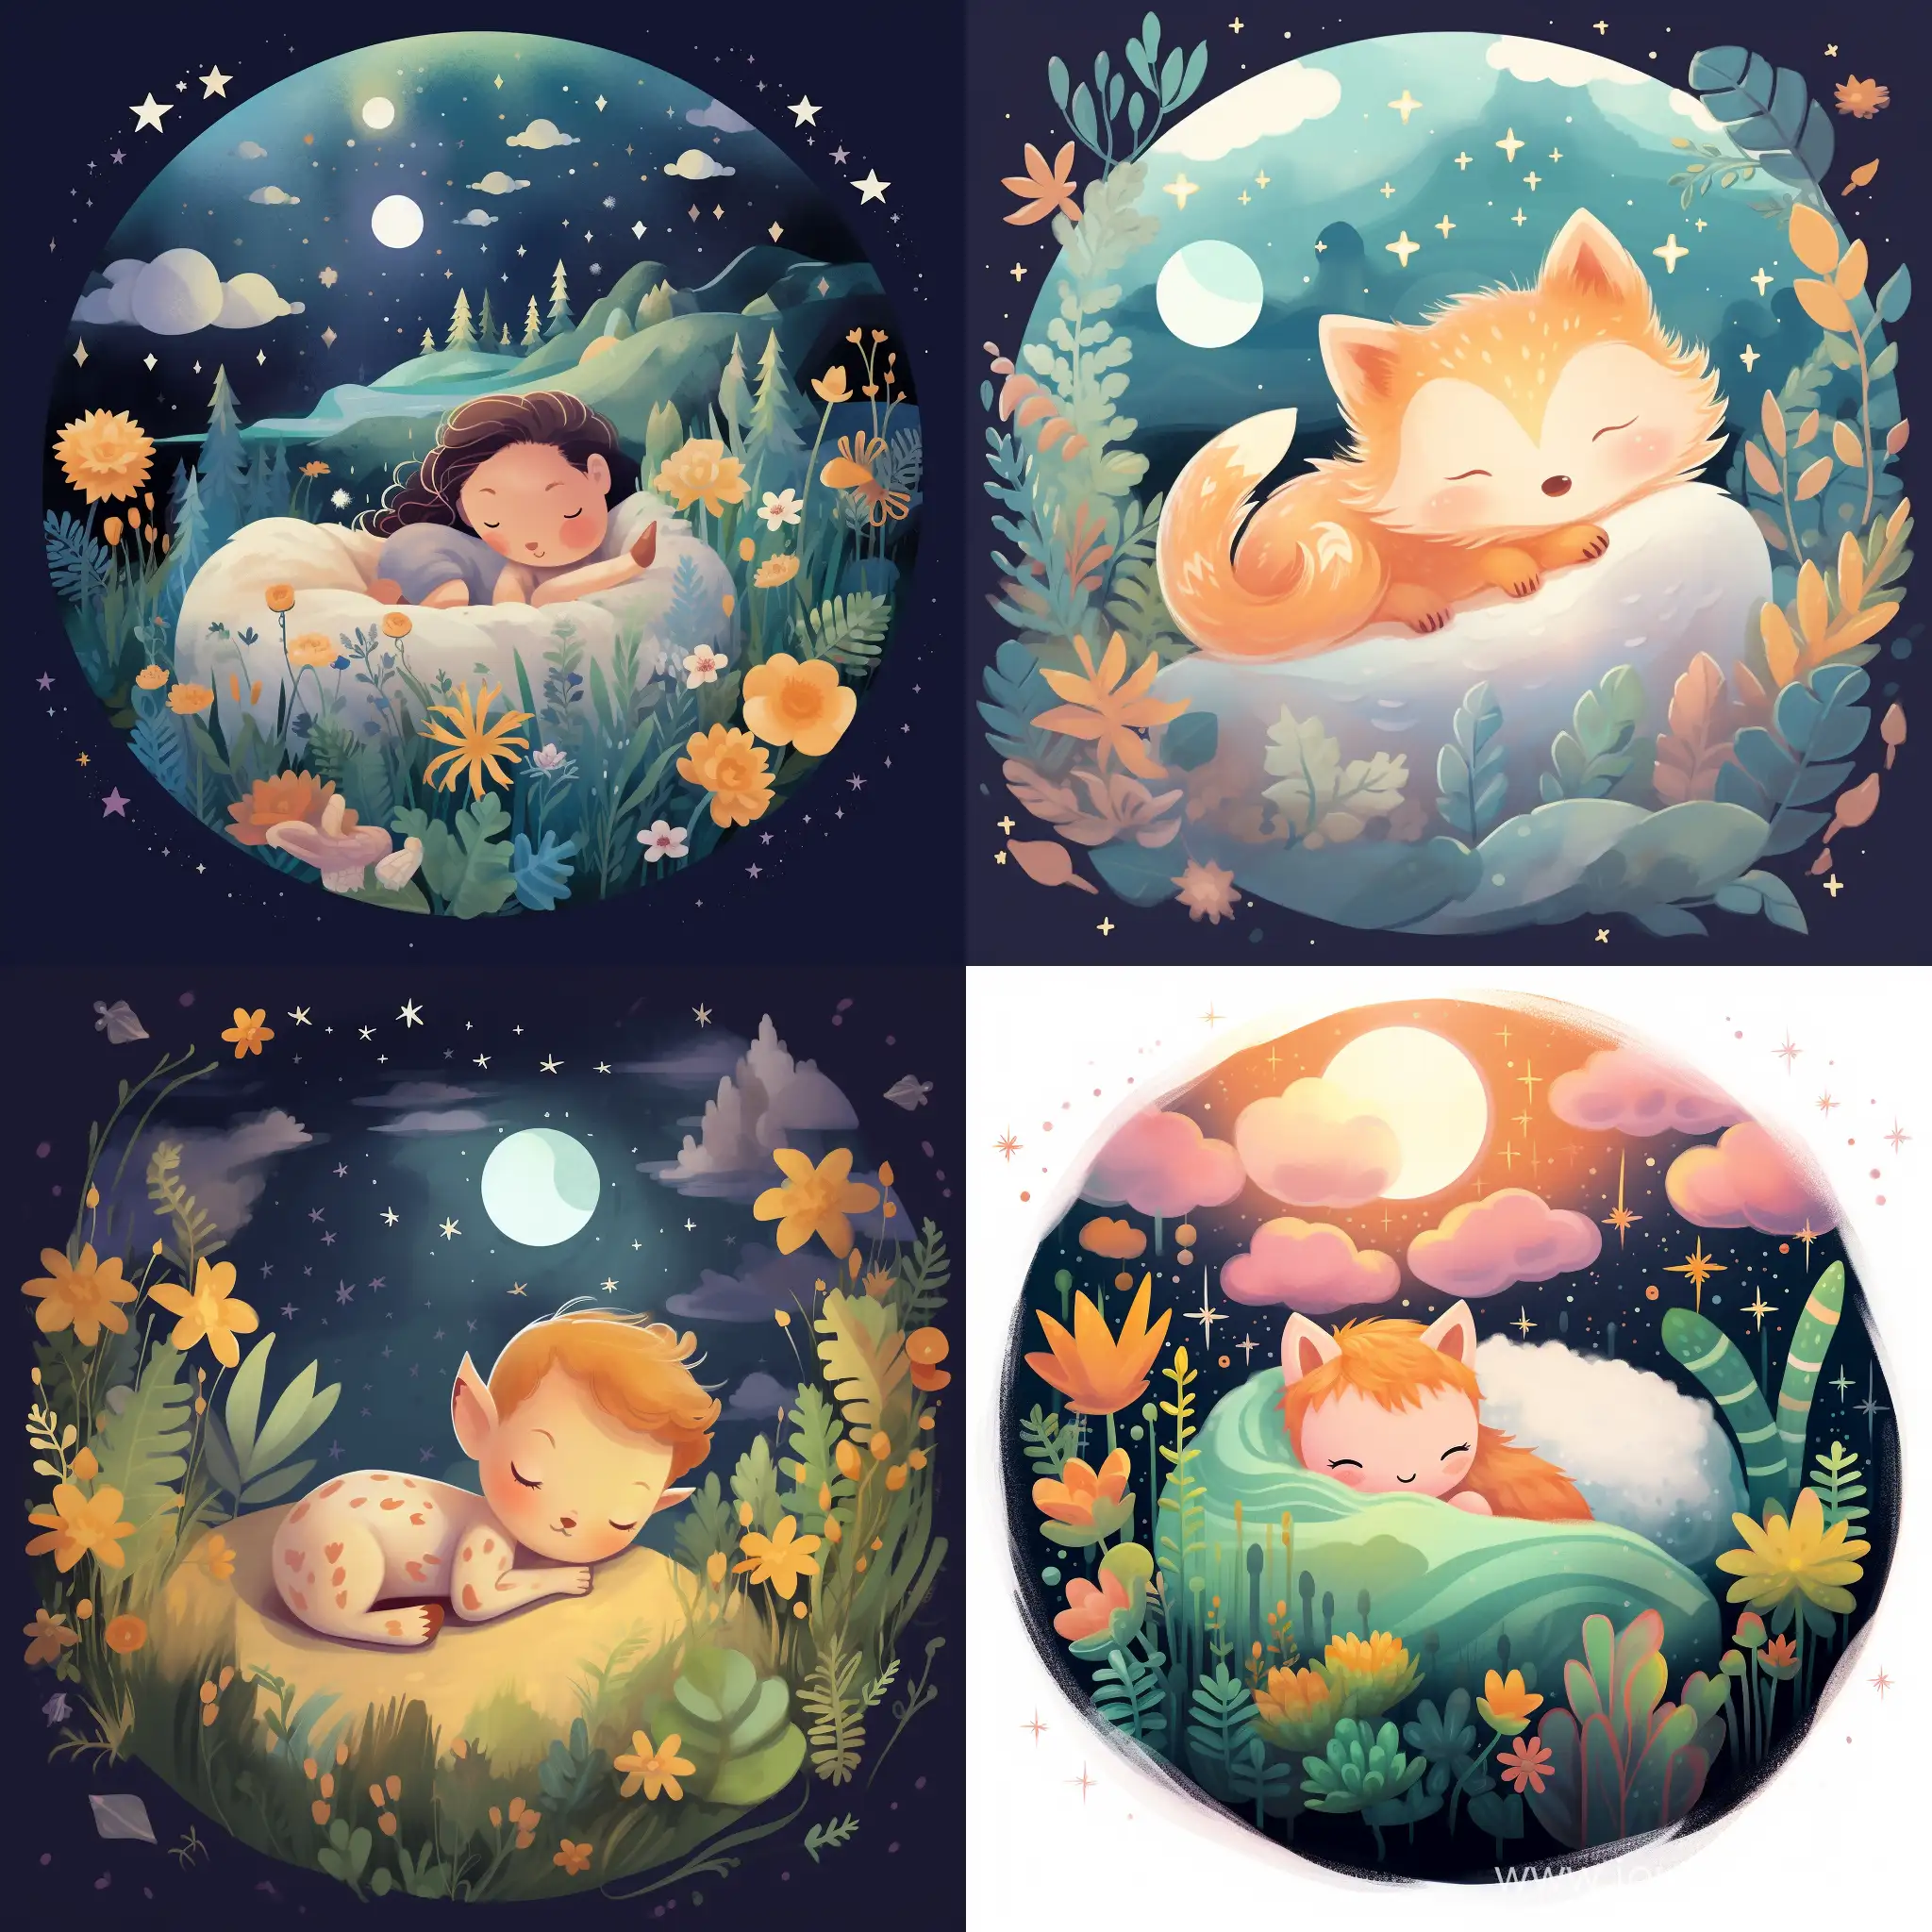 Sleeping-Baby-Fox-in-Galaxy-Garden-Whimsical-Childrens-Book-Cover